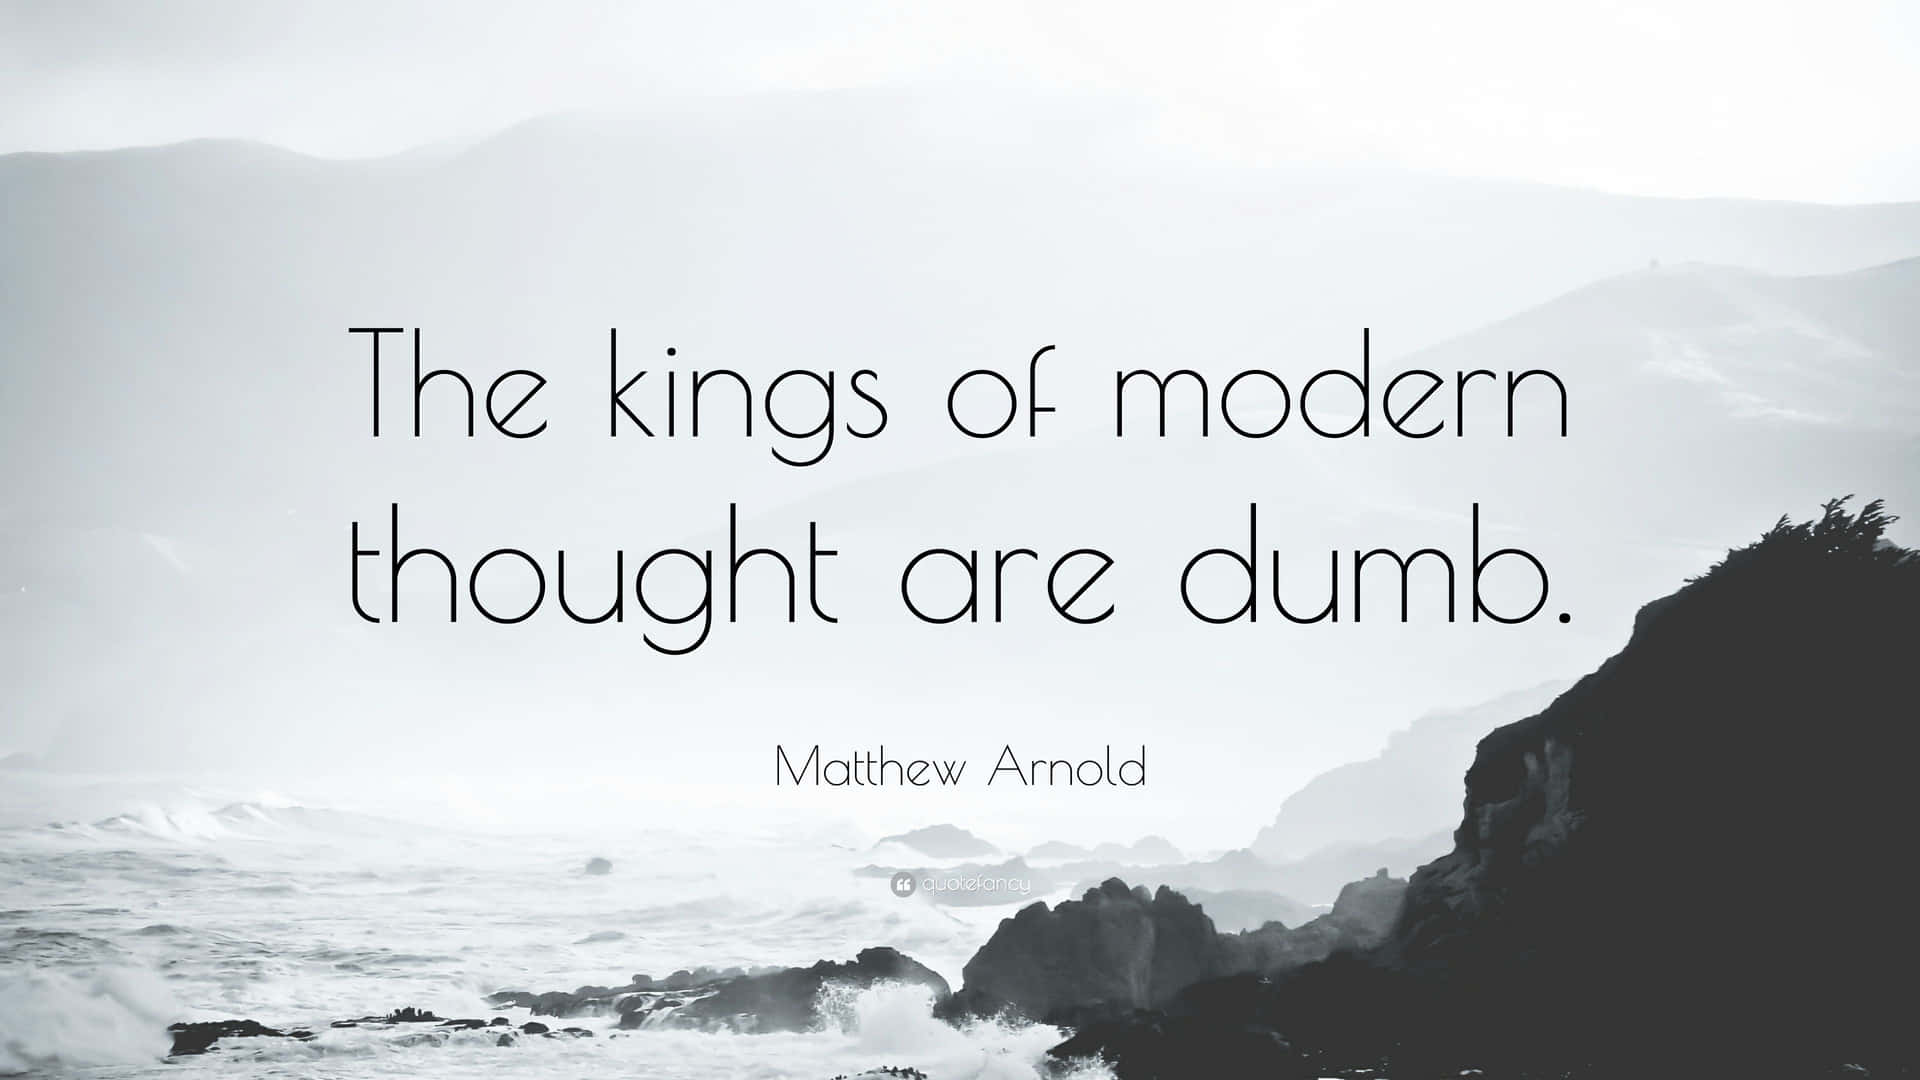 The Kings Of Modern Thought Are Dumb